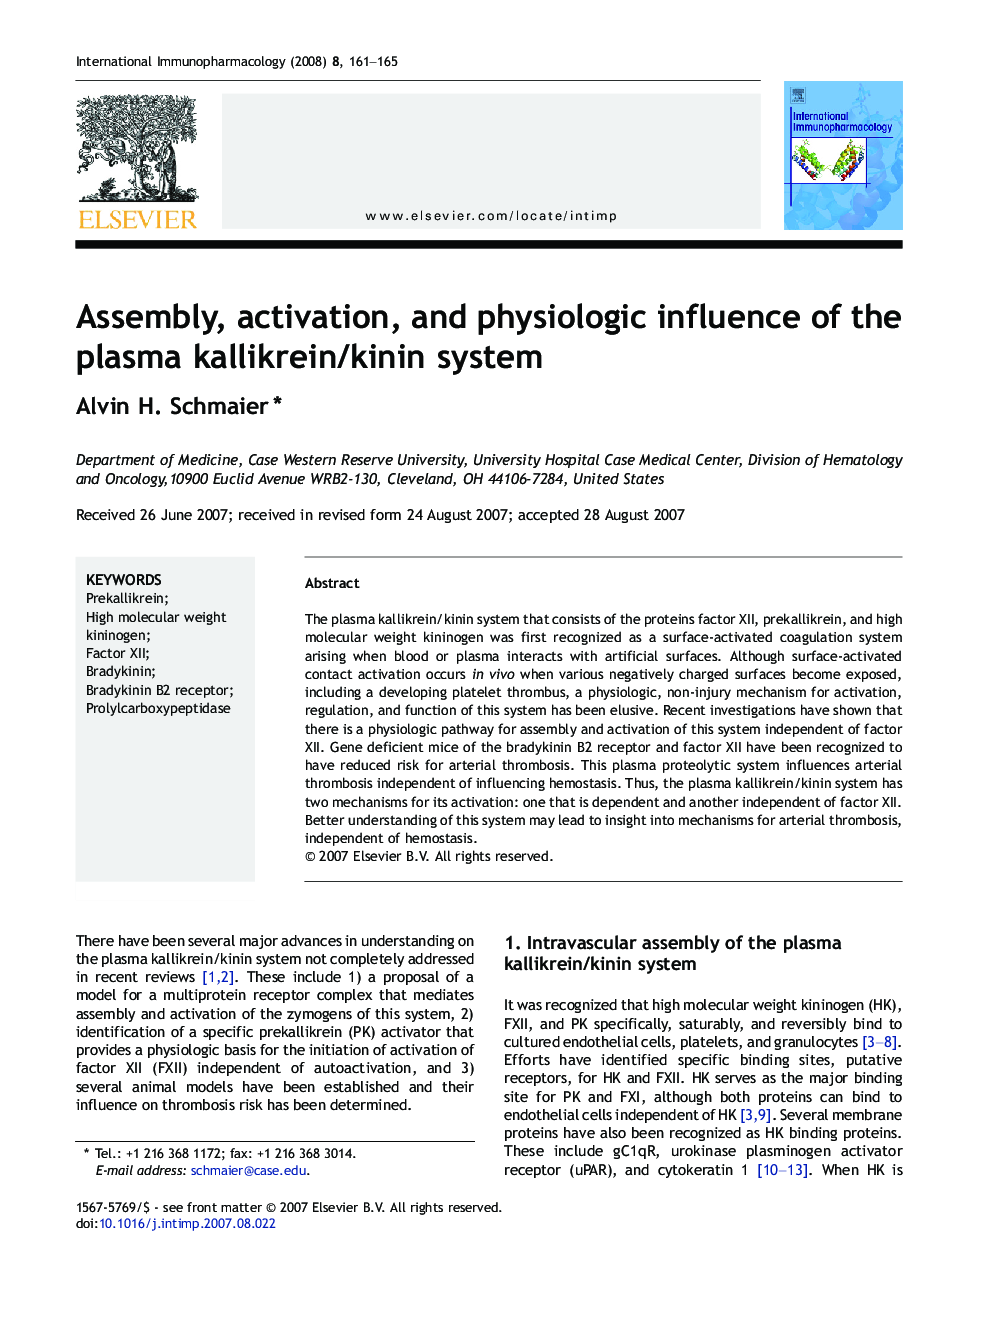 Assembly, activation, and physiologic influence of the plasma kallikrein/kinin system